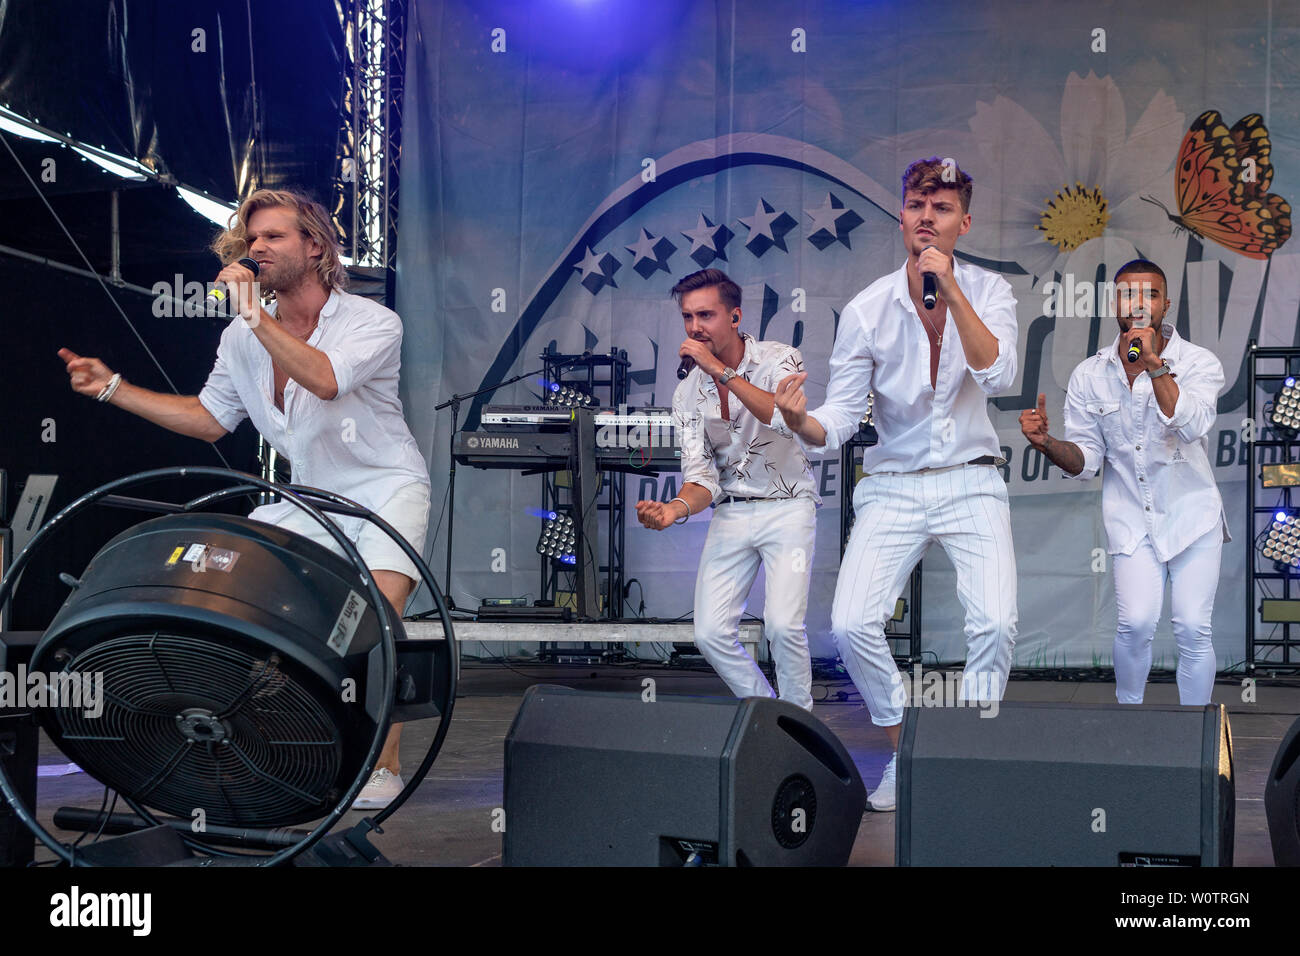 Feuerherz ( Boygroup ) at the biggest hit Open Air in Berlin, the Schlagerolymp 2018 is now rising for the seventh time in Berlin's leisure and recreation park Lübars. Stock Photo